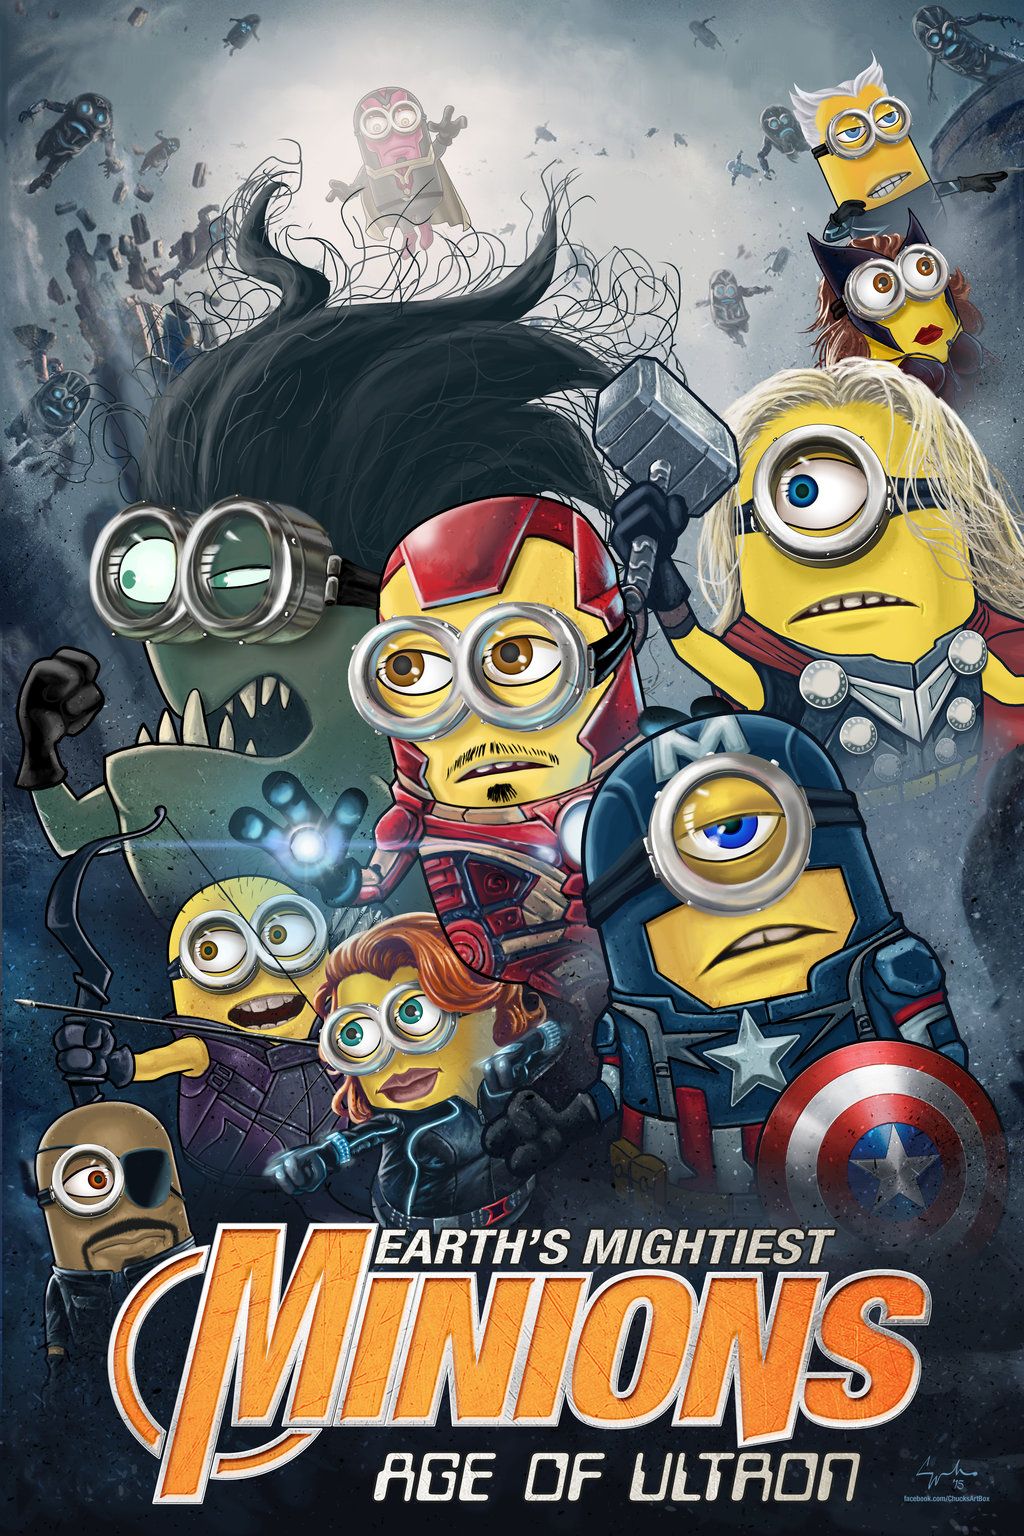 Earth's Mightiest Minions Avengers Age of Ultron. Minion avengers, Minions wallpaper, Avengers fan art